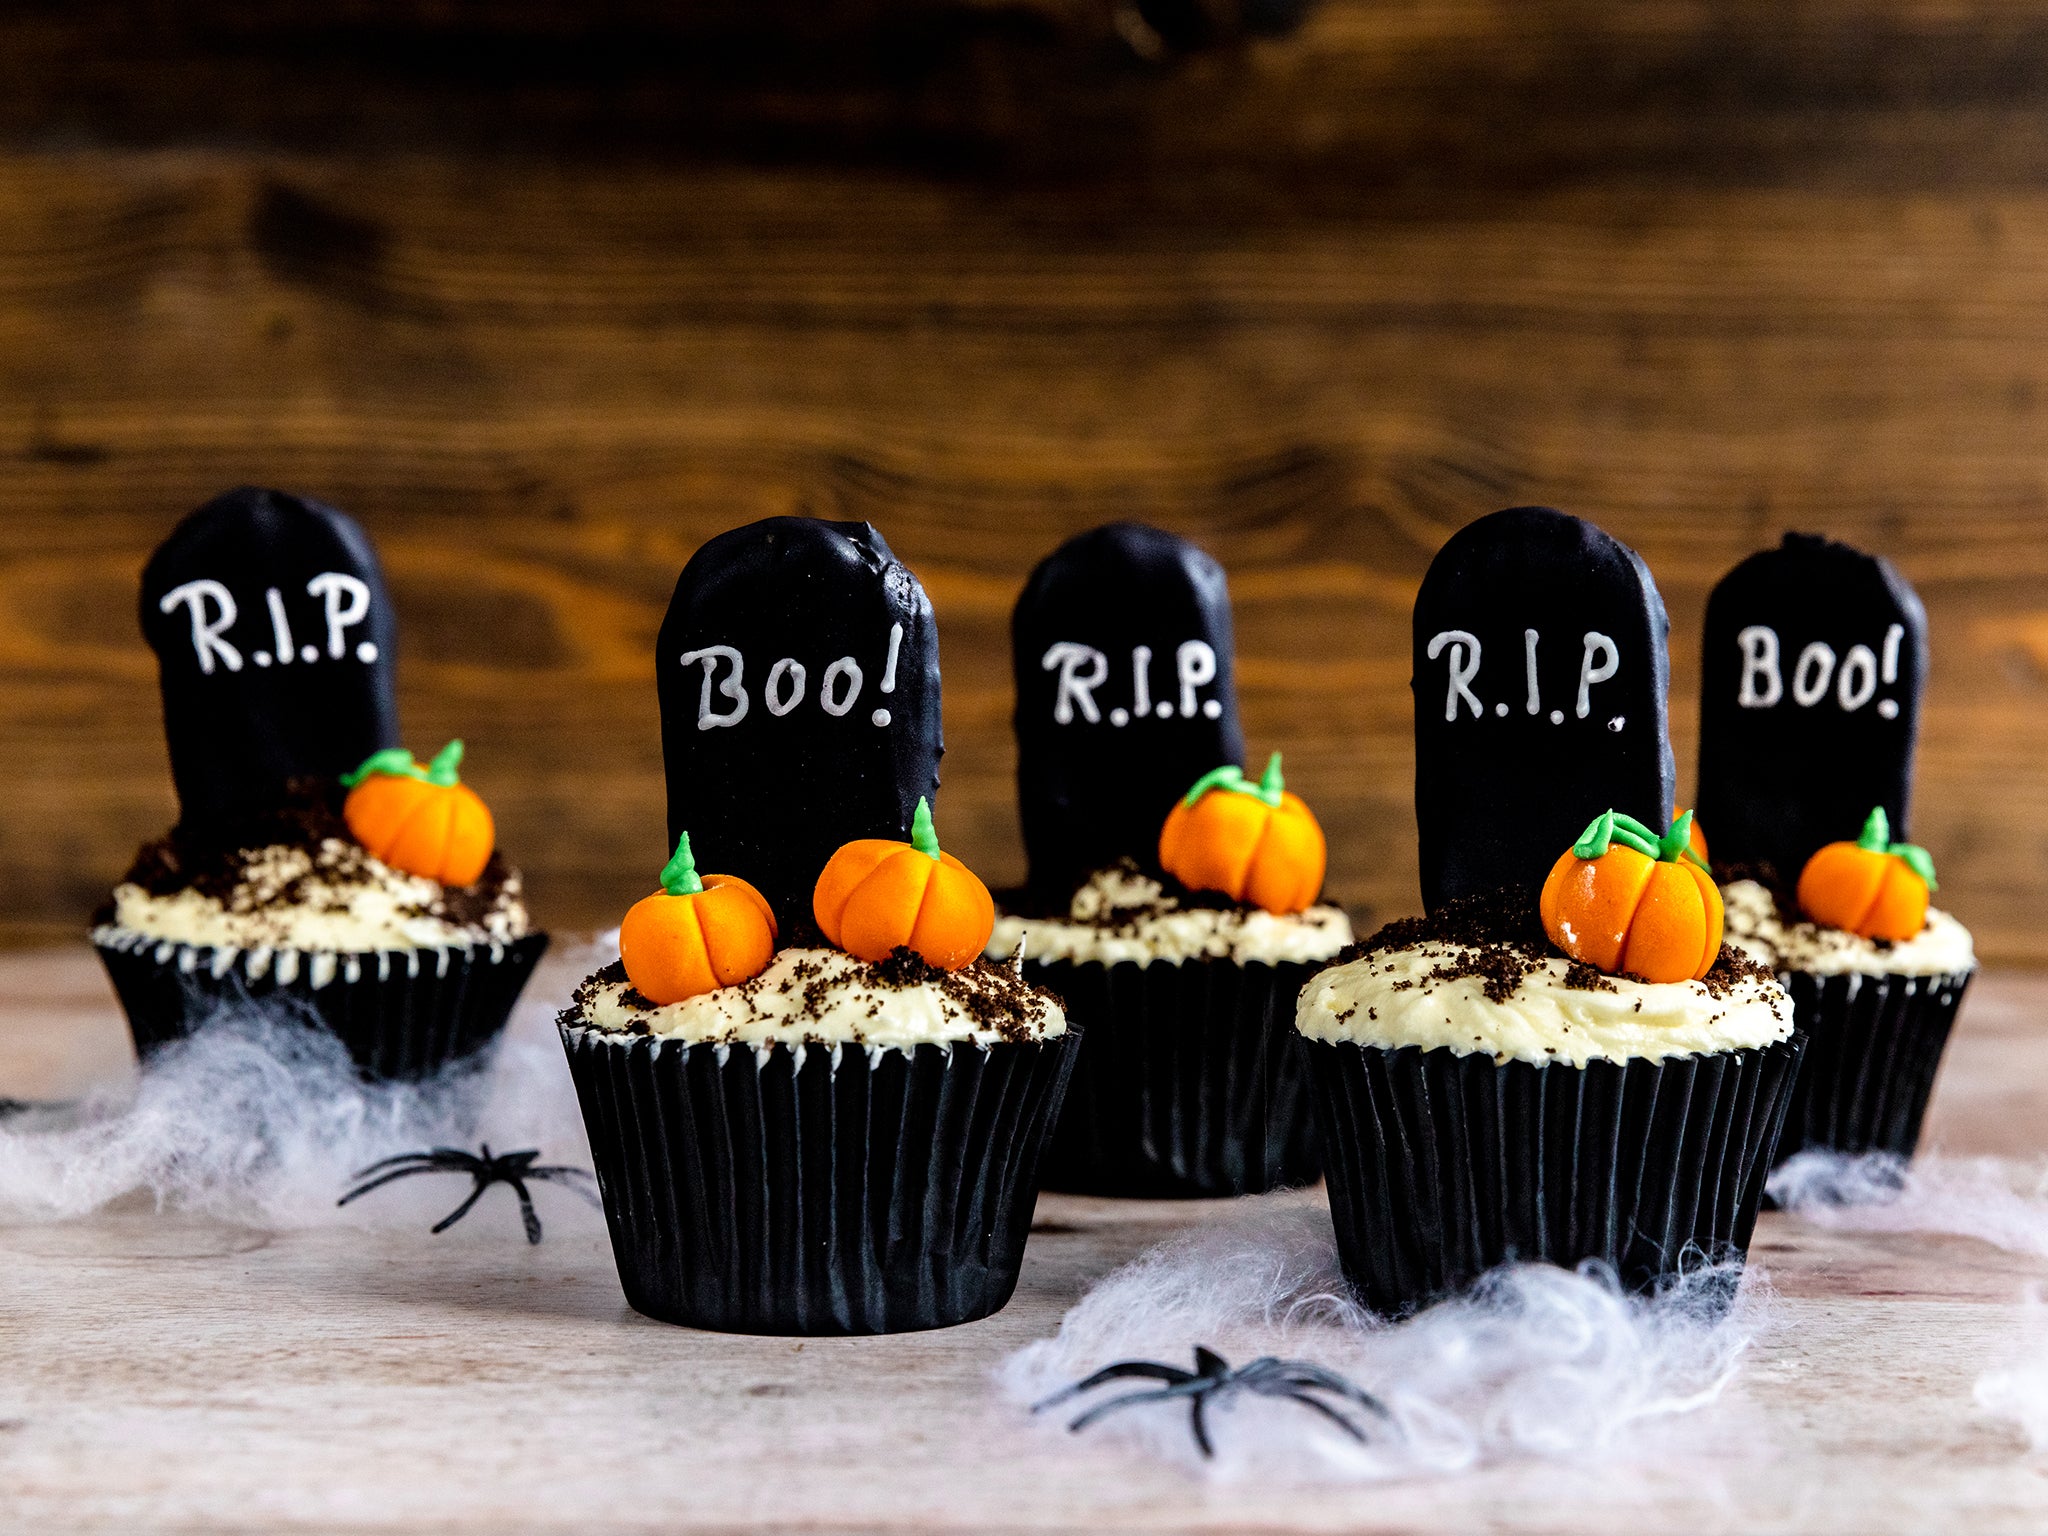 Give your cupcakes a Halloween twist using carrot cake mix